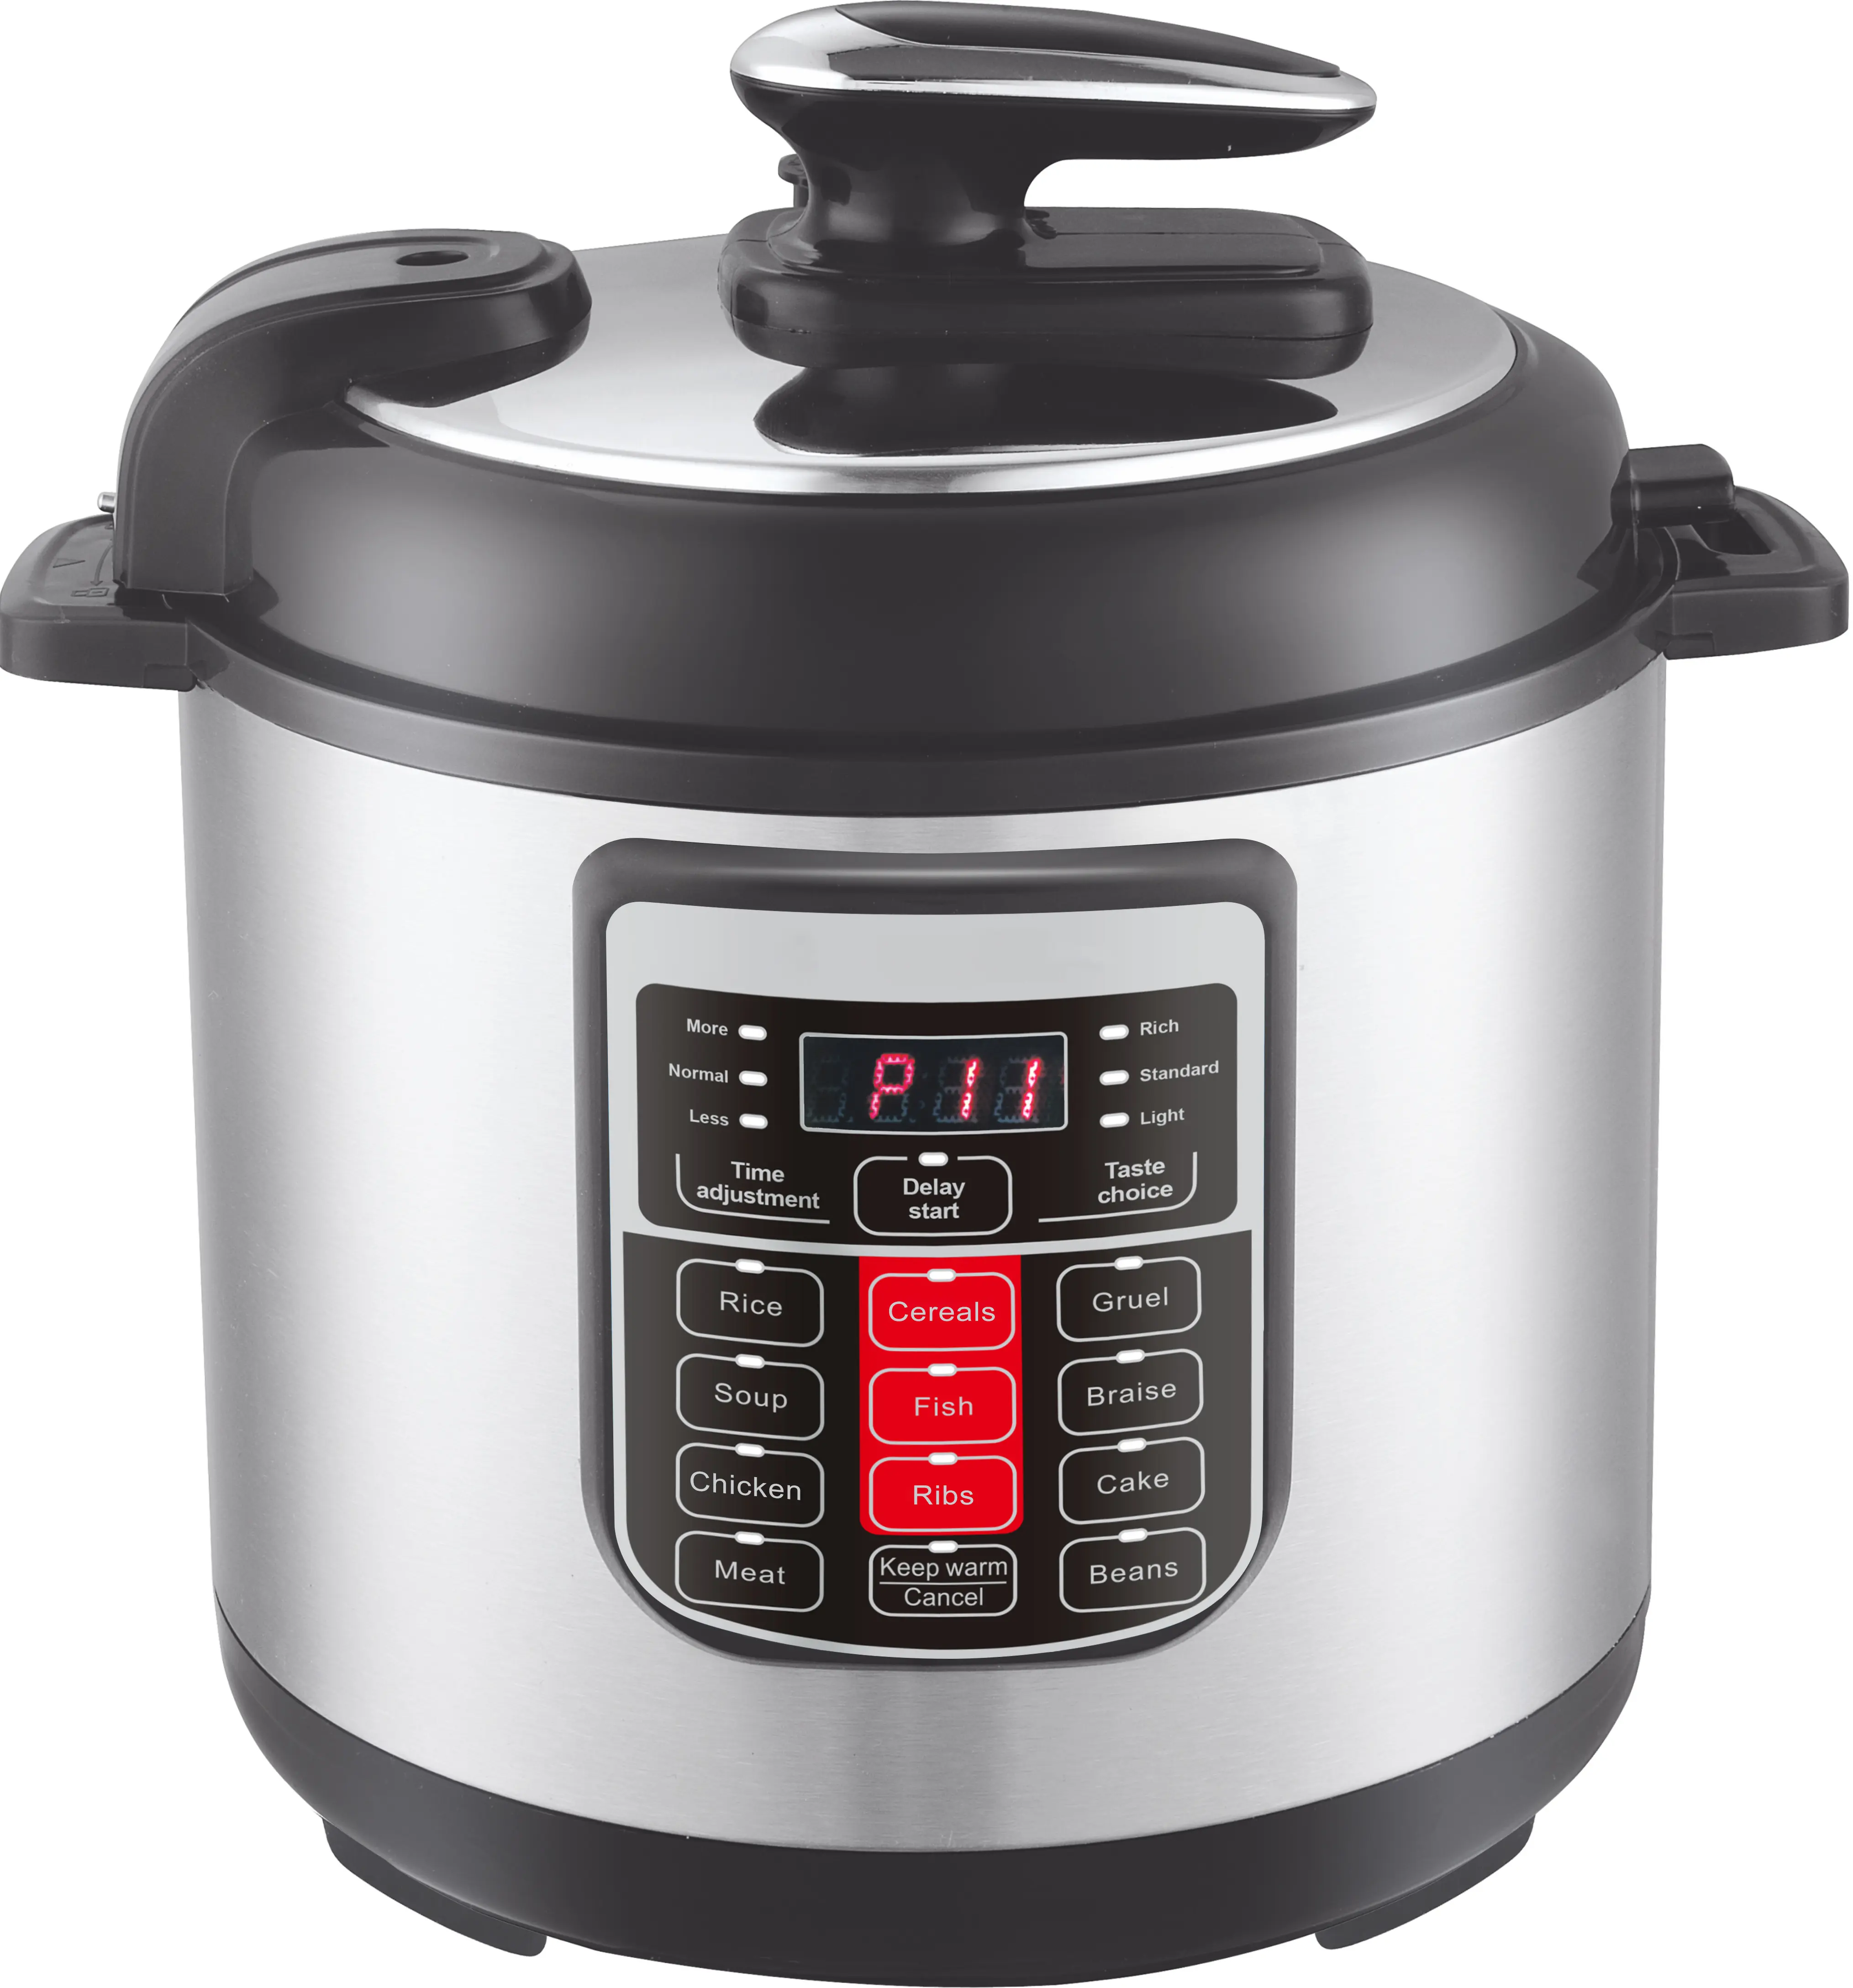 In stock Multifunctional 6L, Food Steamer Electric Programmable Pot Pressure Cooker Rice Cooker With Non-Stick Bowl/